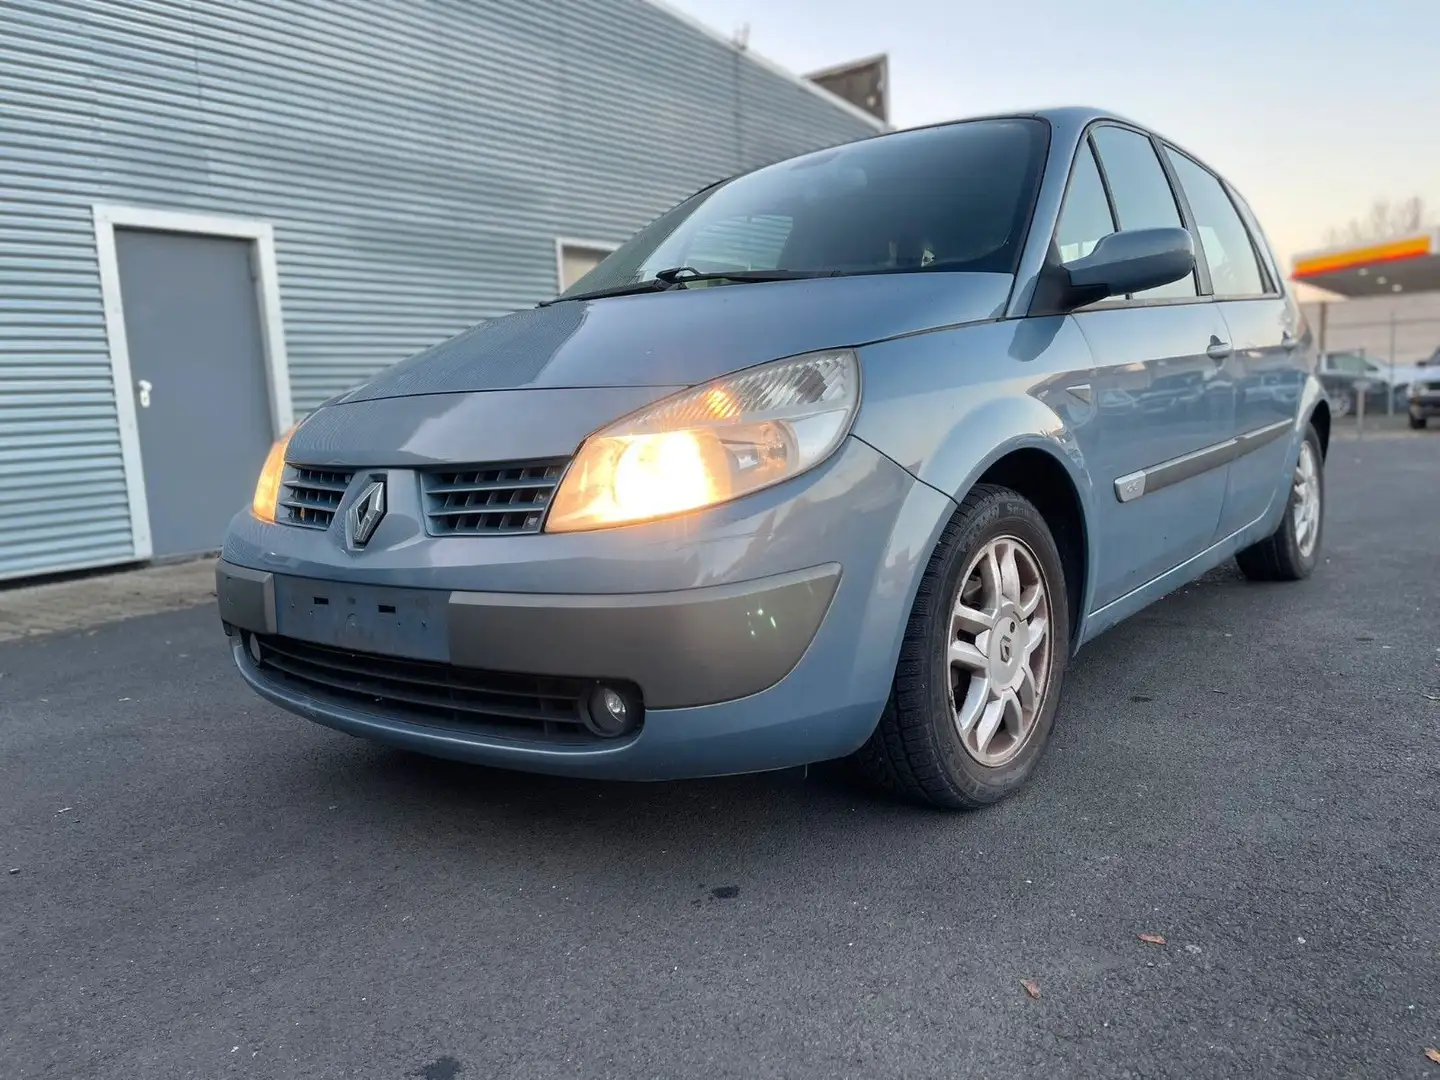 Renault Scenic Exception 1.5 dCi 78kW - 1